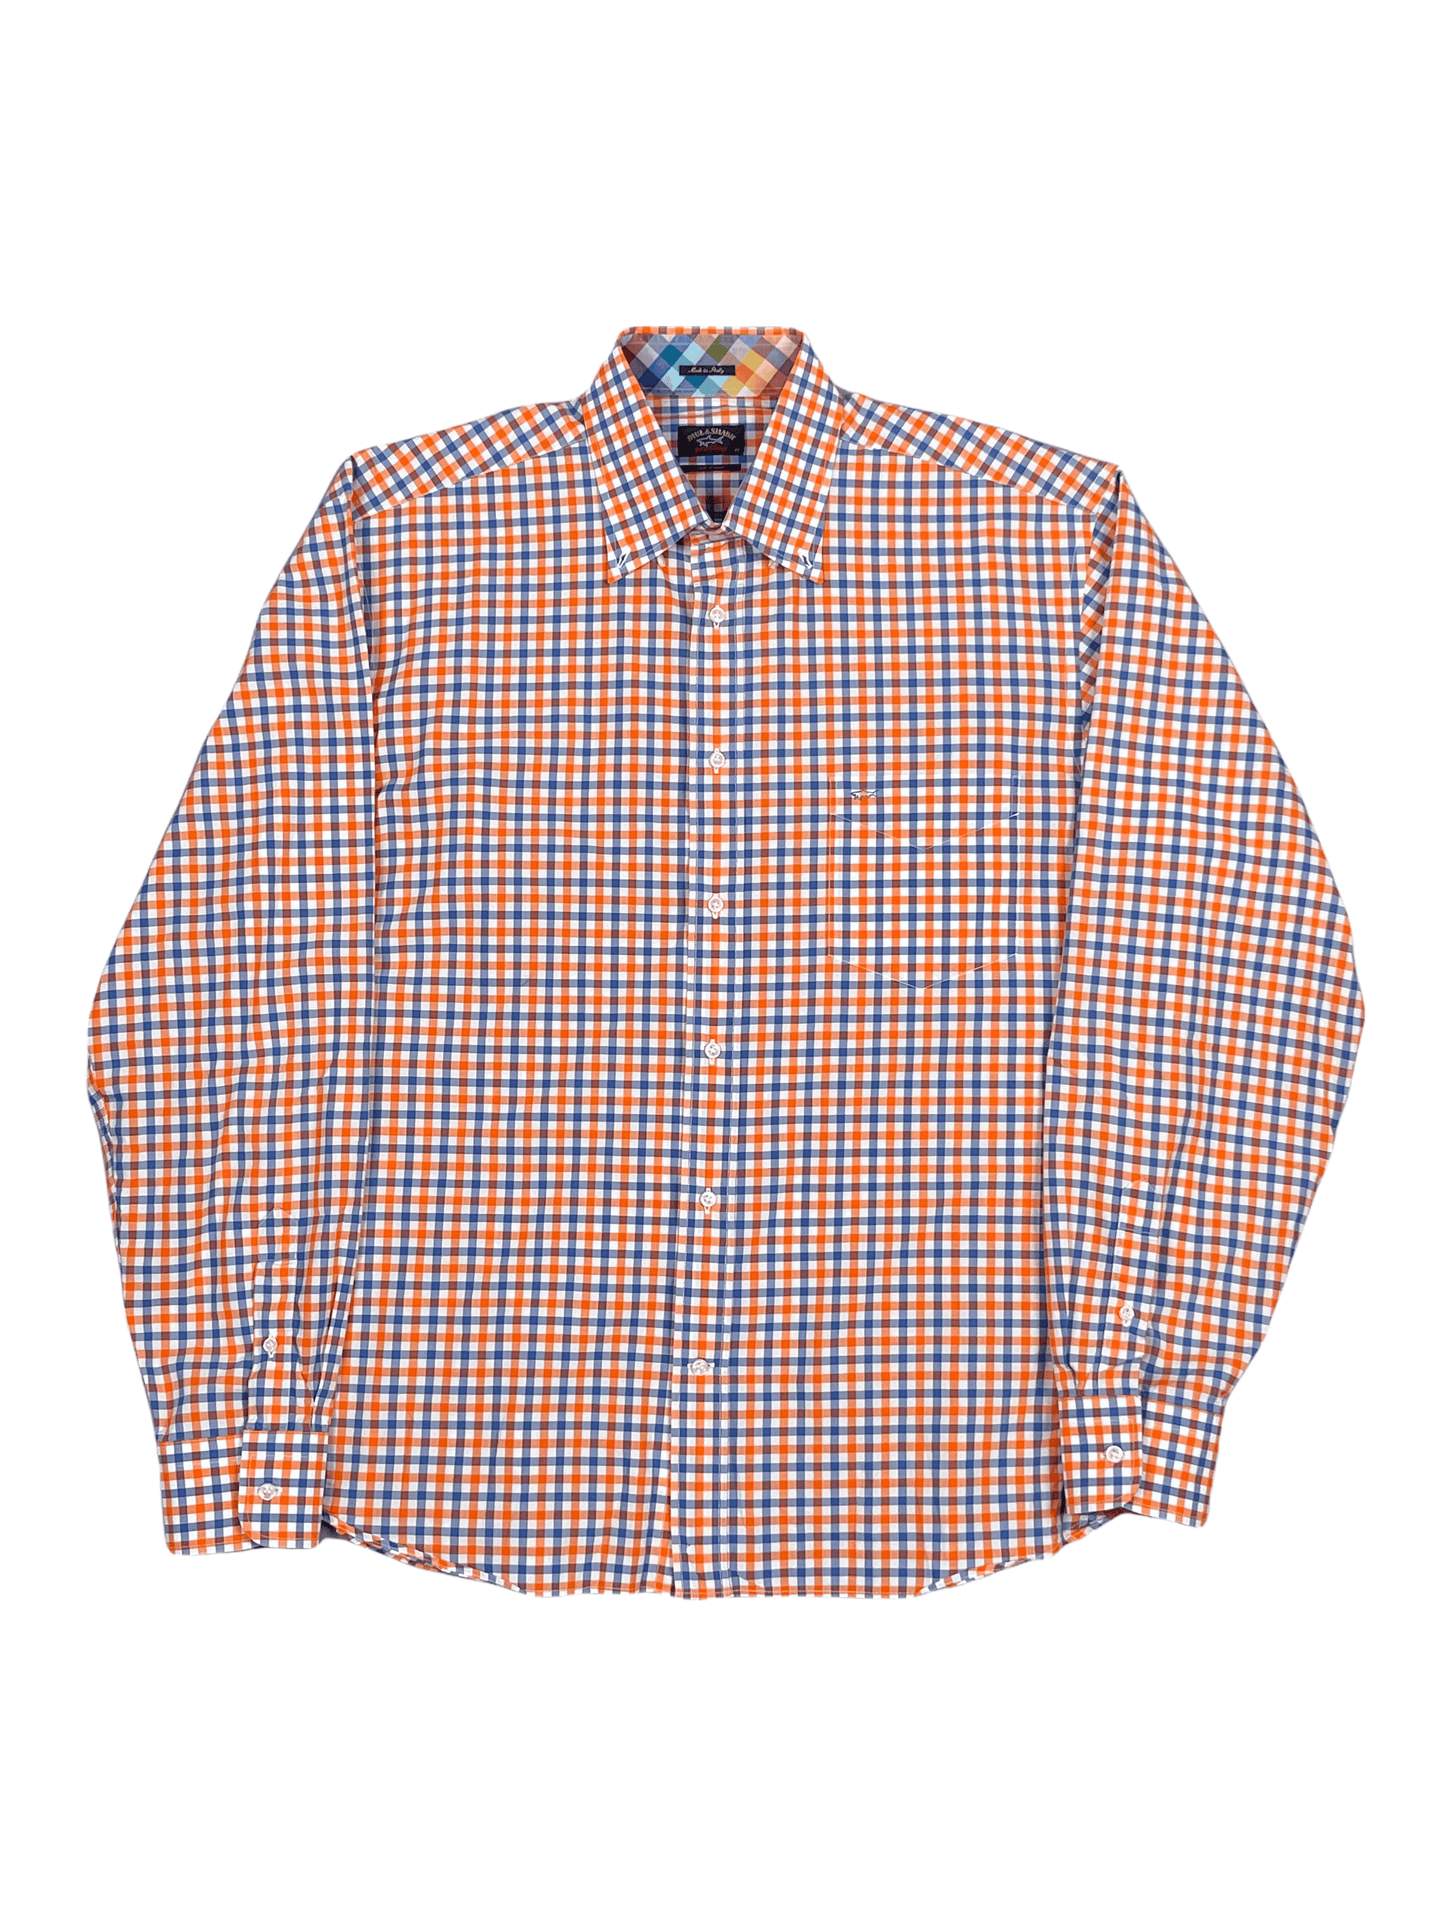 Paul & Shark Orange Blue Gingham 17 / 43 - Genuine Design Luxury Consignment for Men. New & Pre-Owned Clothing, Shoes, & Accessories. Calgary, Canada